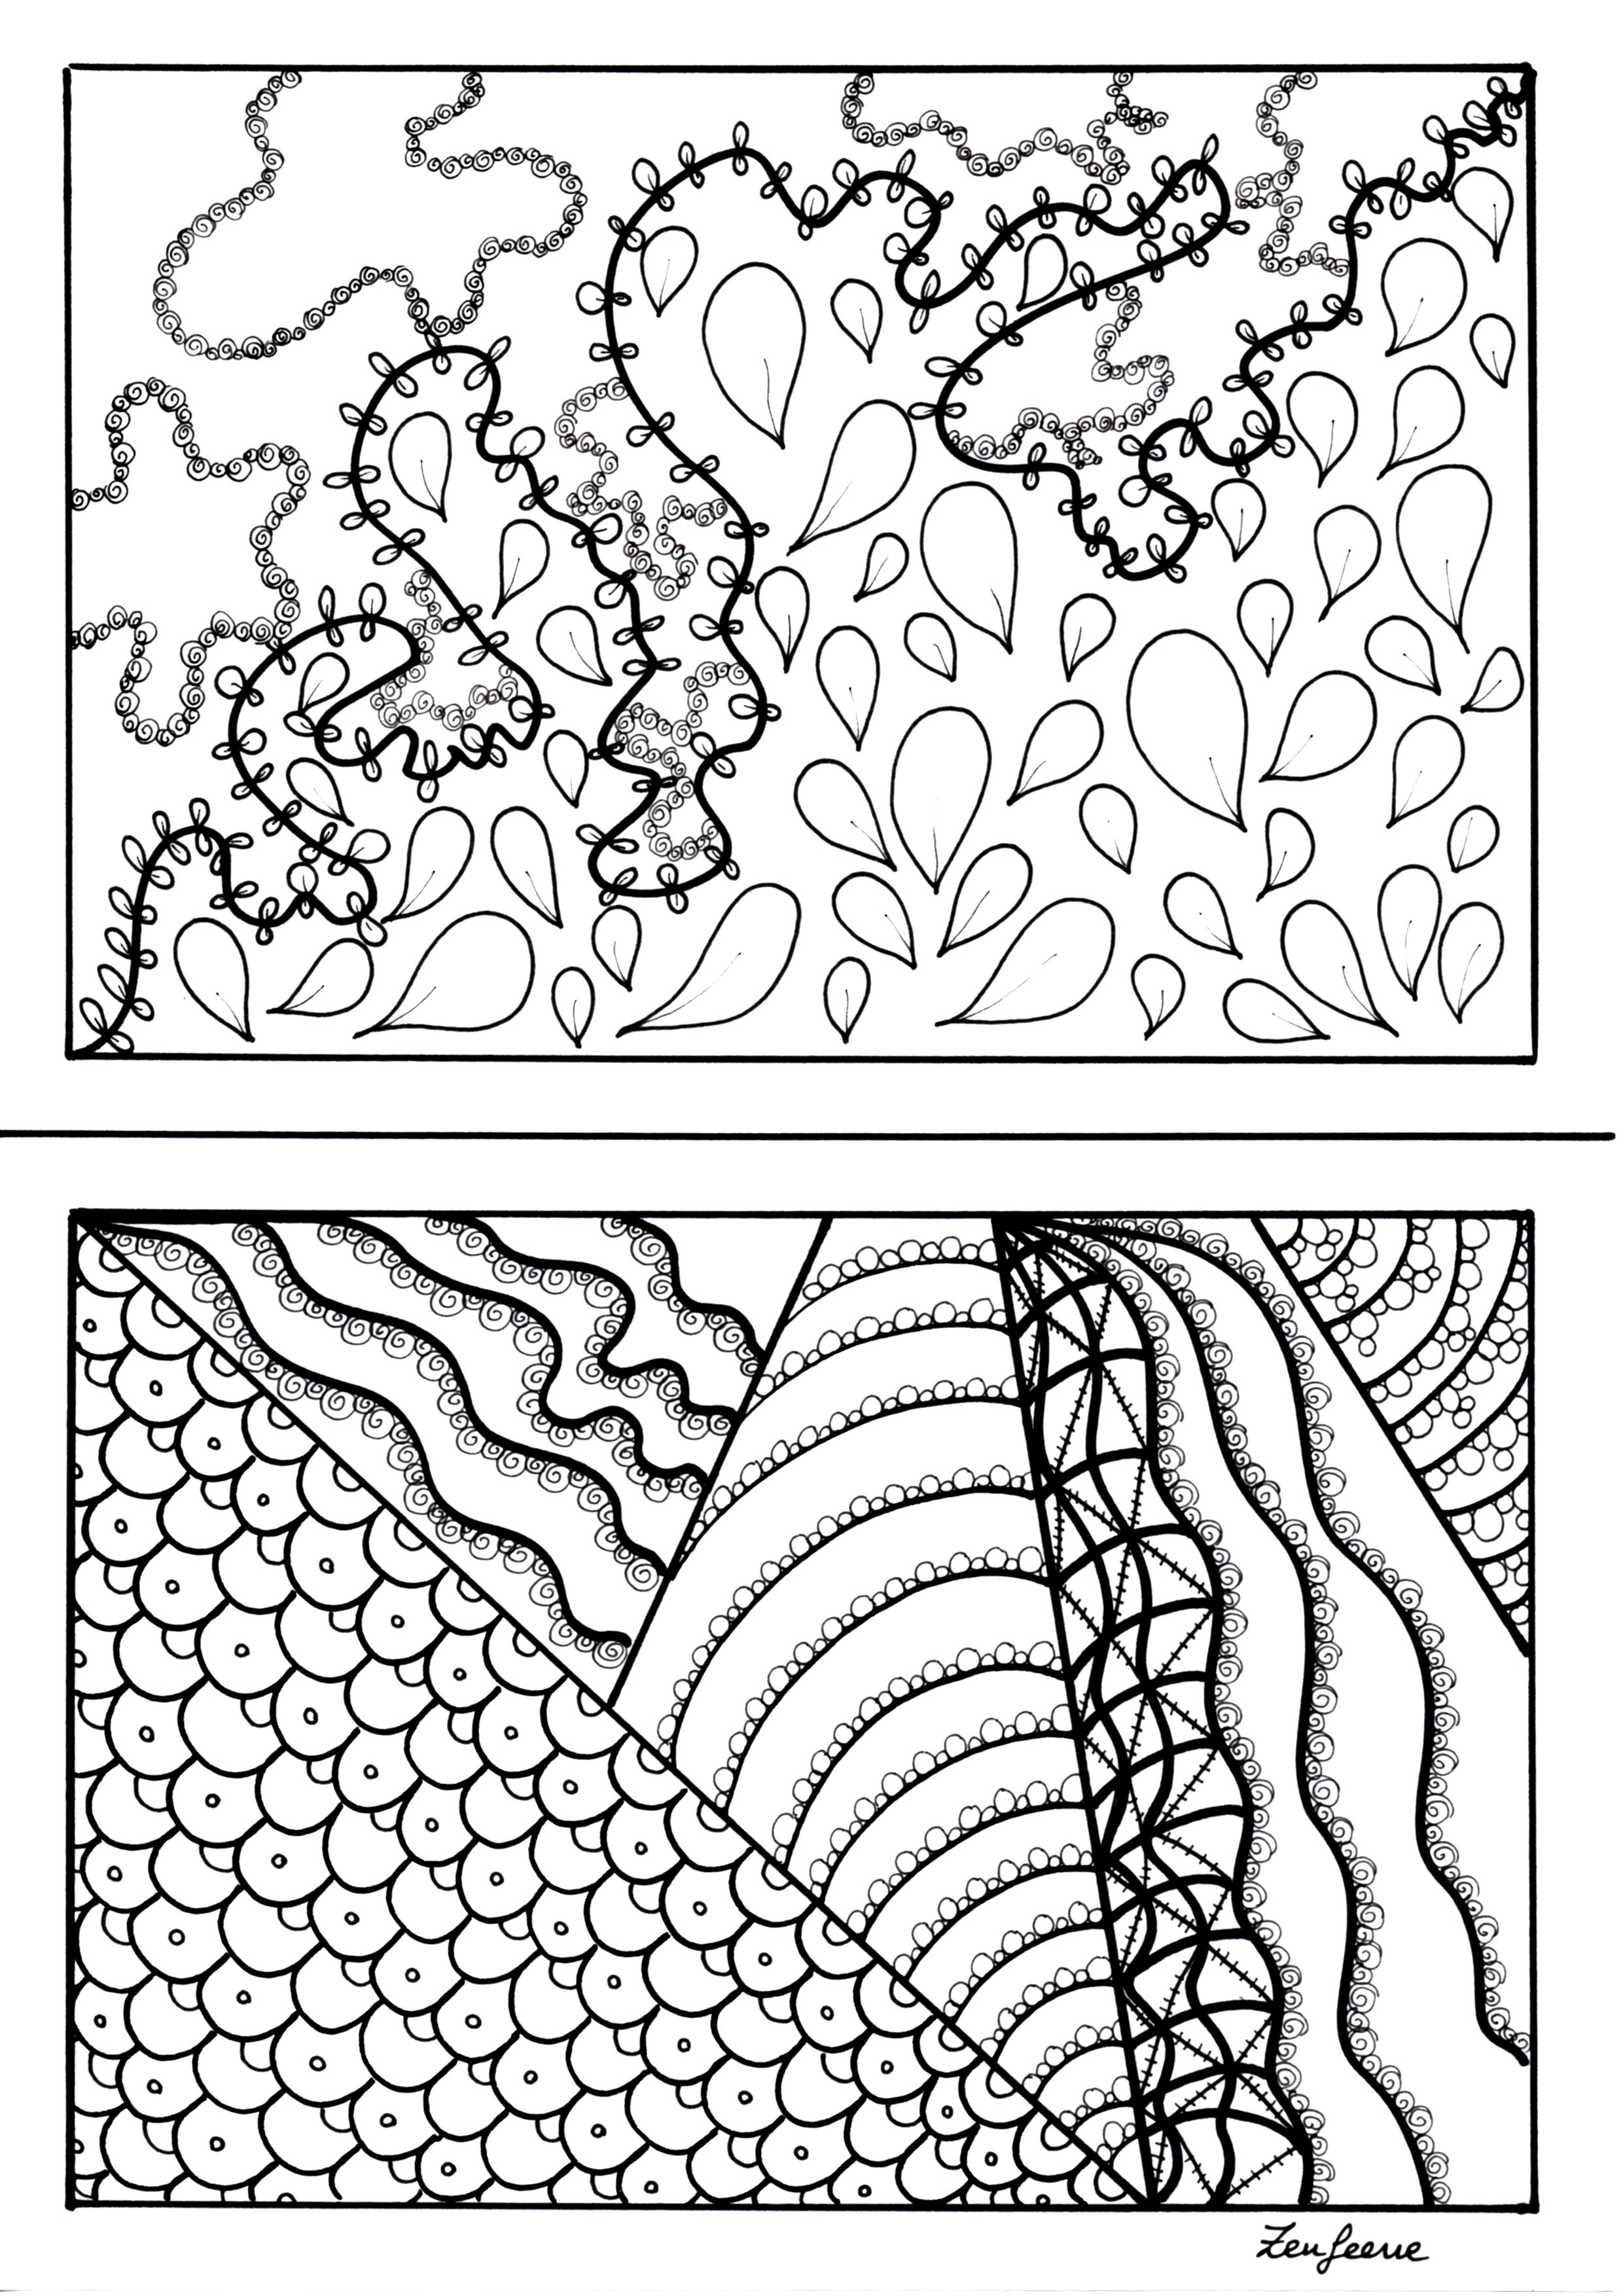 Simple Zentangle coloring page for kids